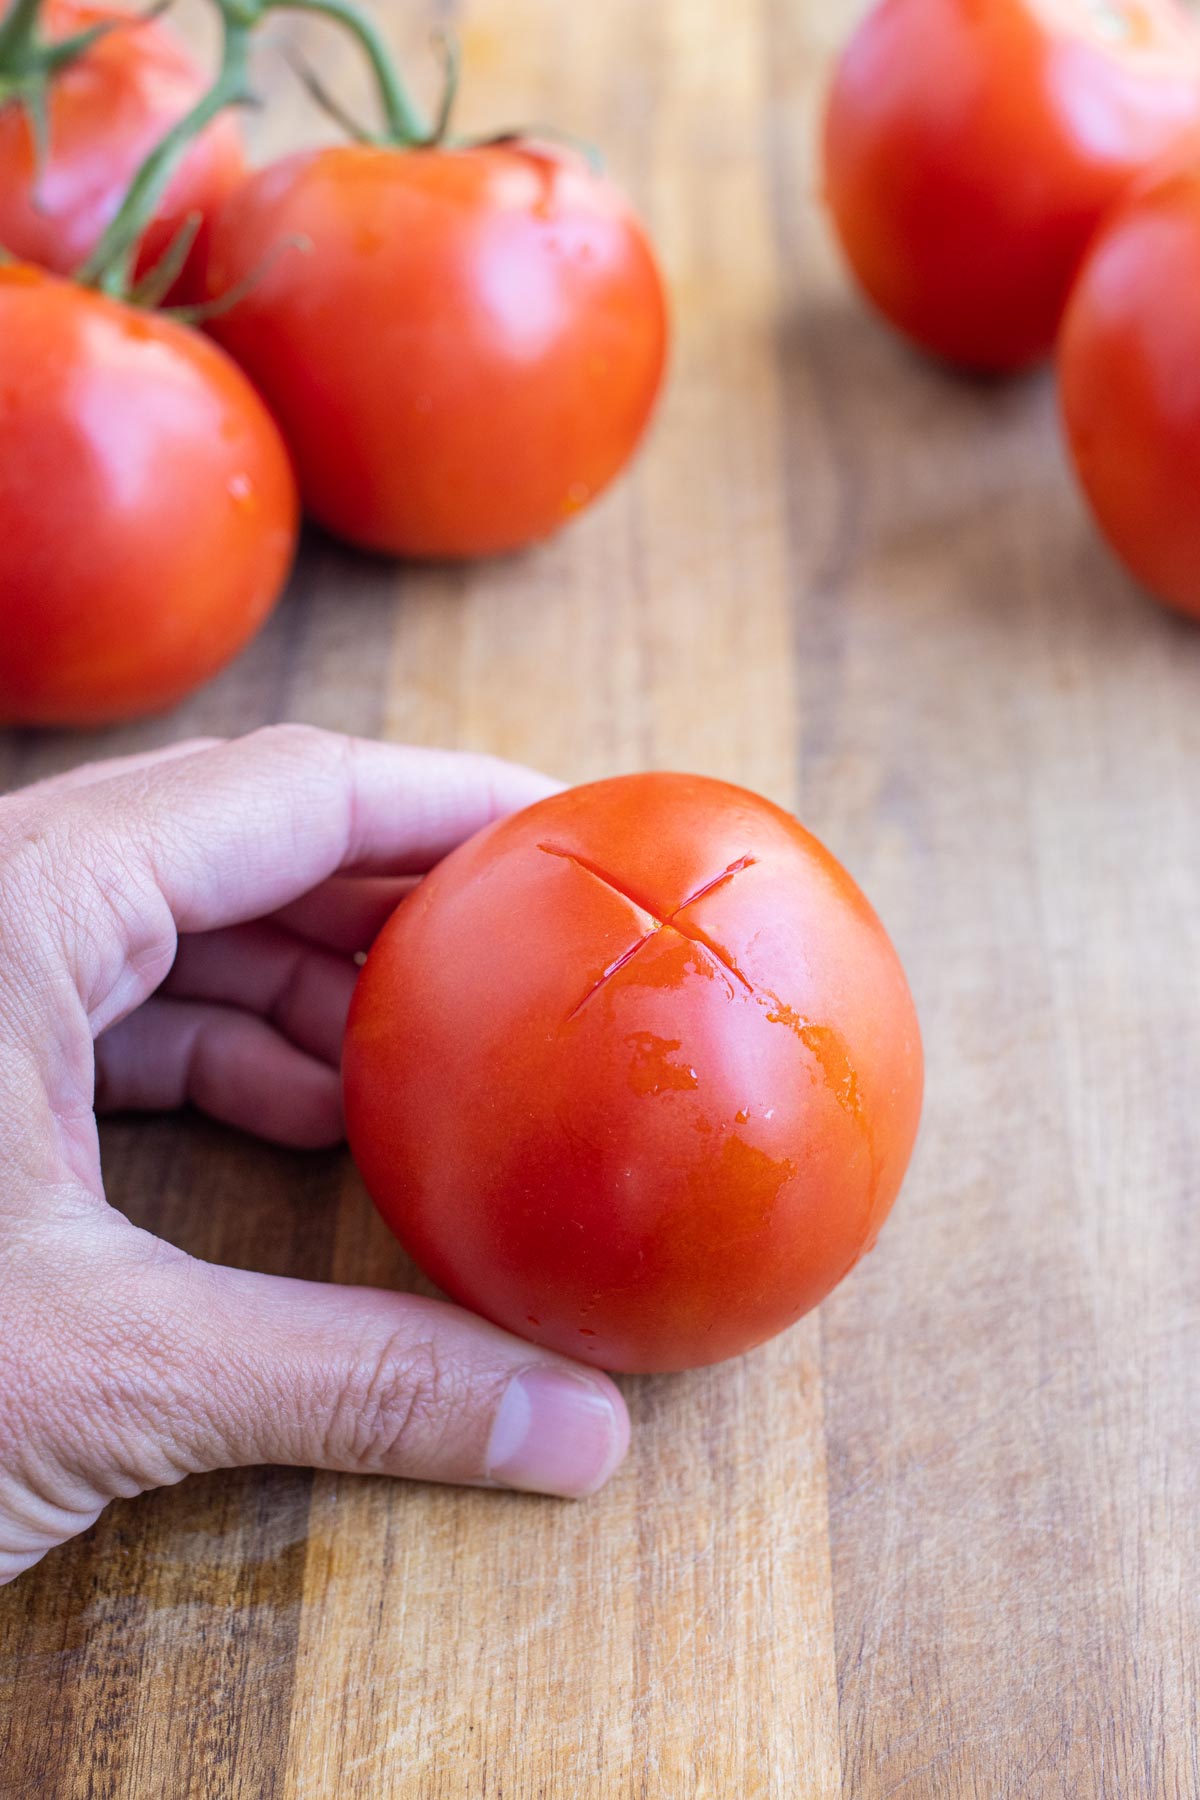 You can see an X on the bottom of the tomato.